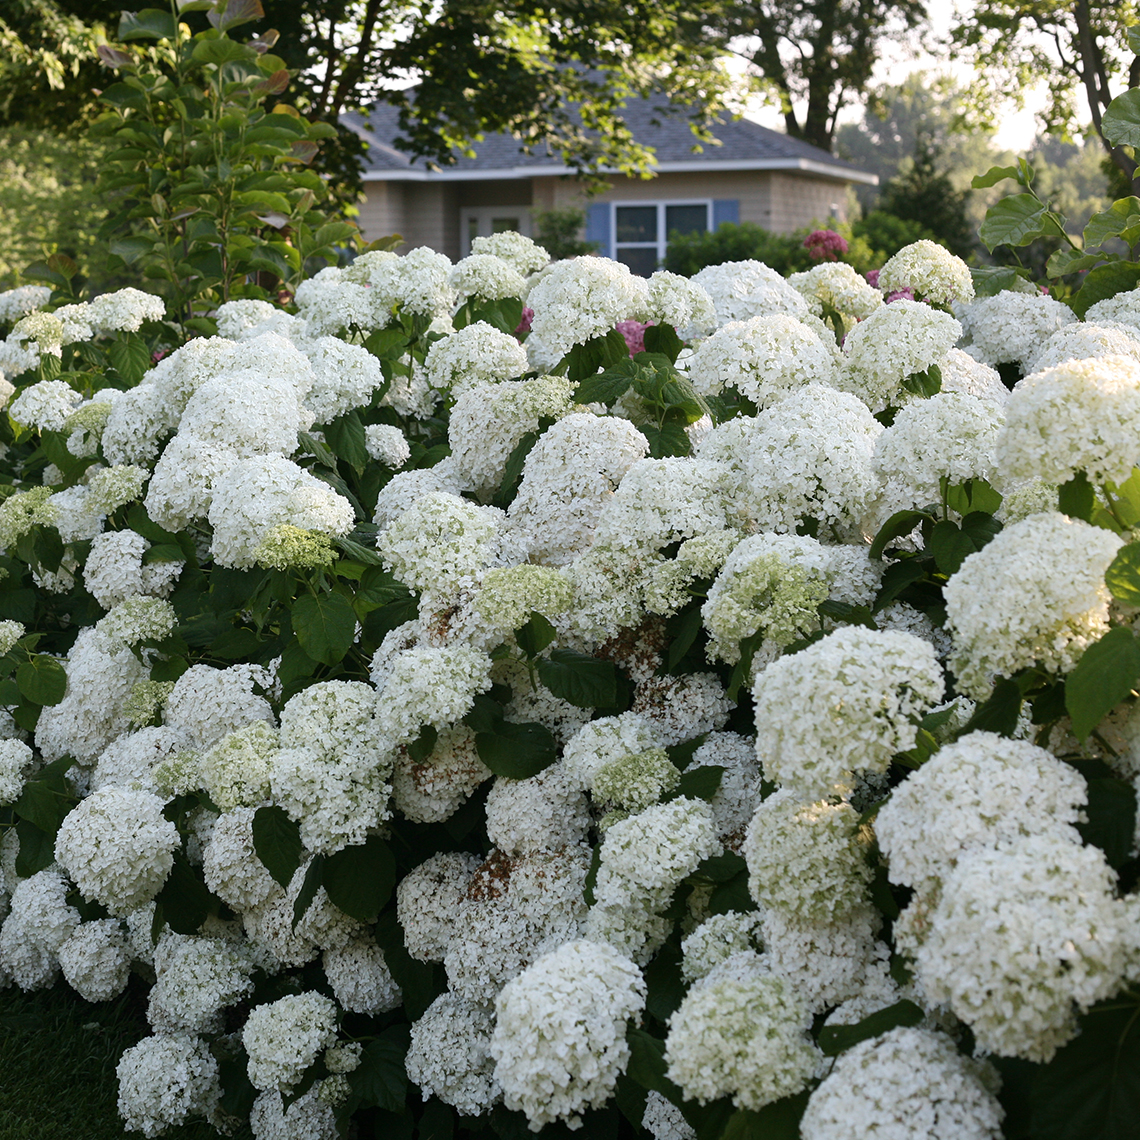 A very large specimen of Incrediball hydrangea covered in enormous white flowers with a yellow house with blue shutters in the background